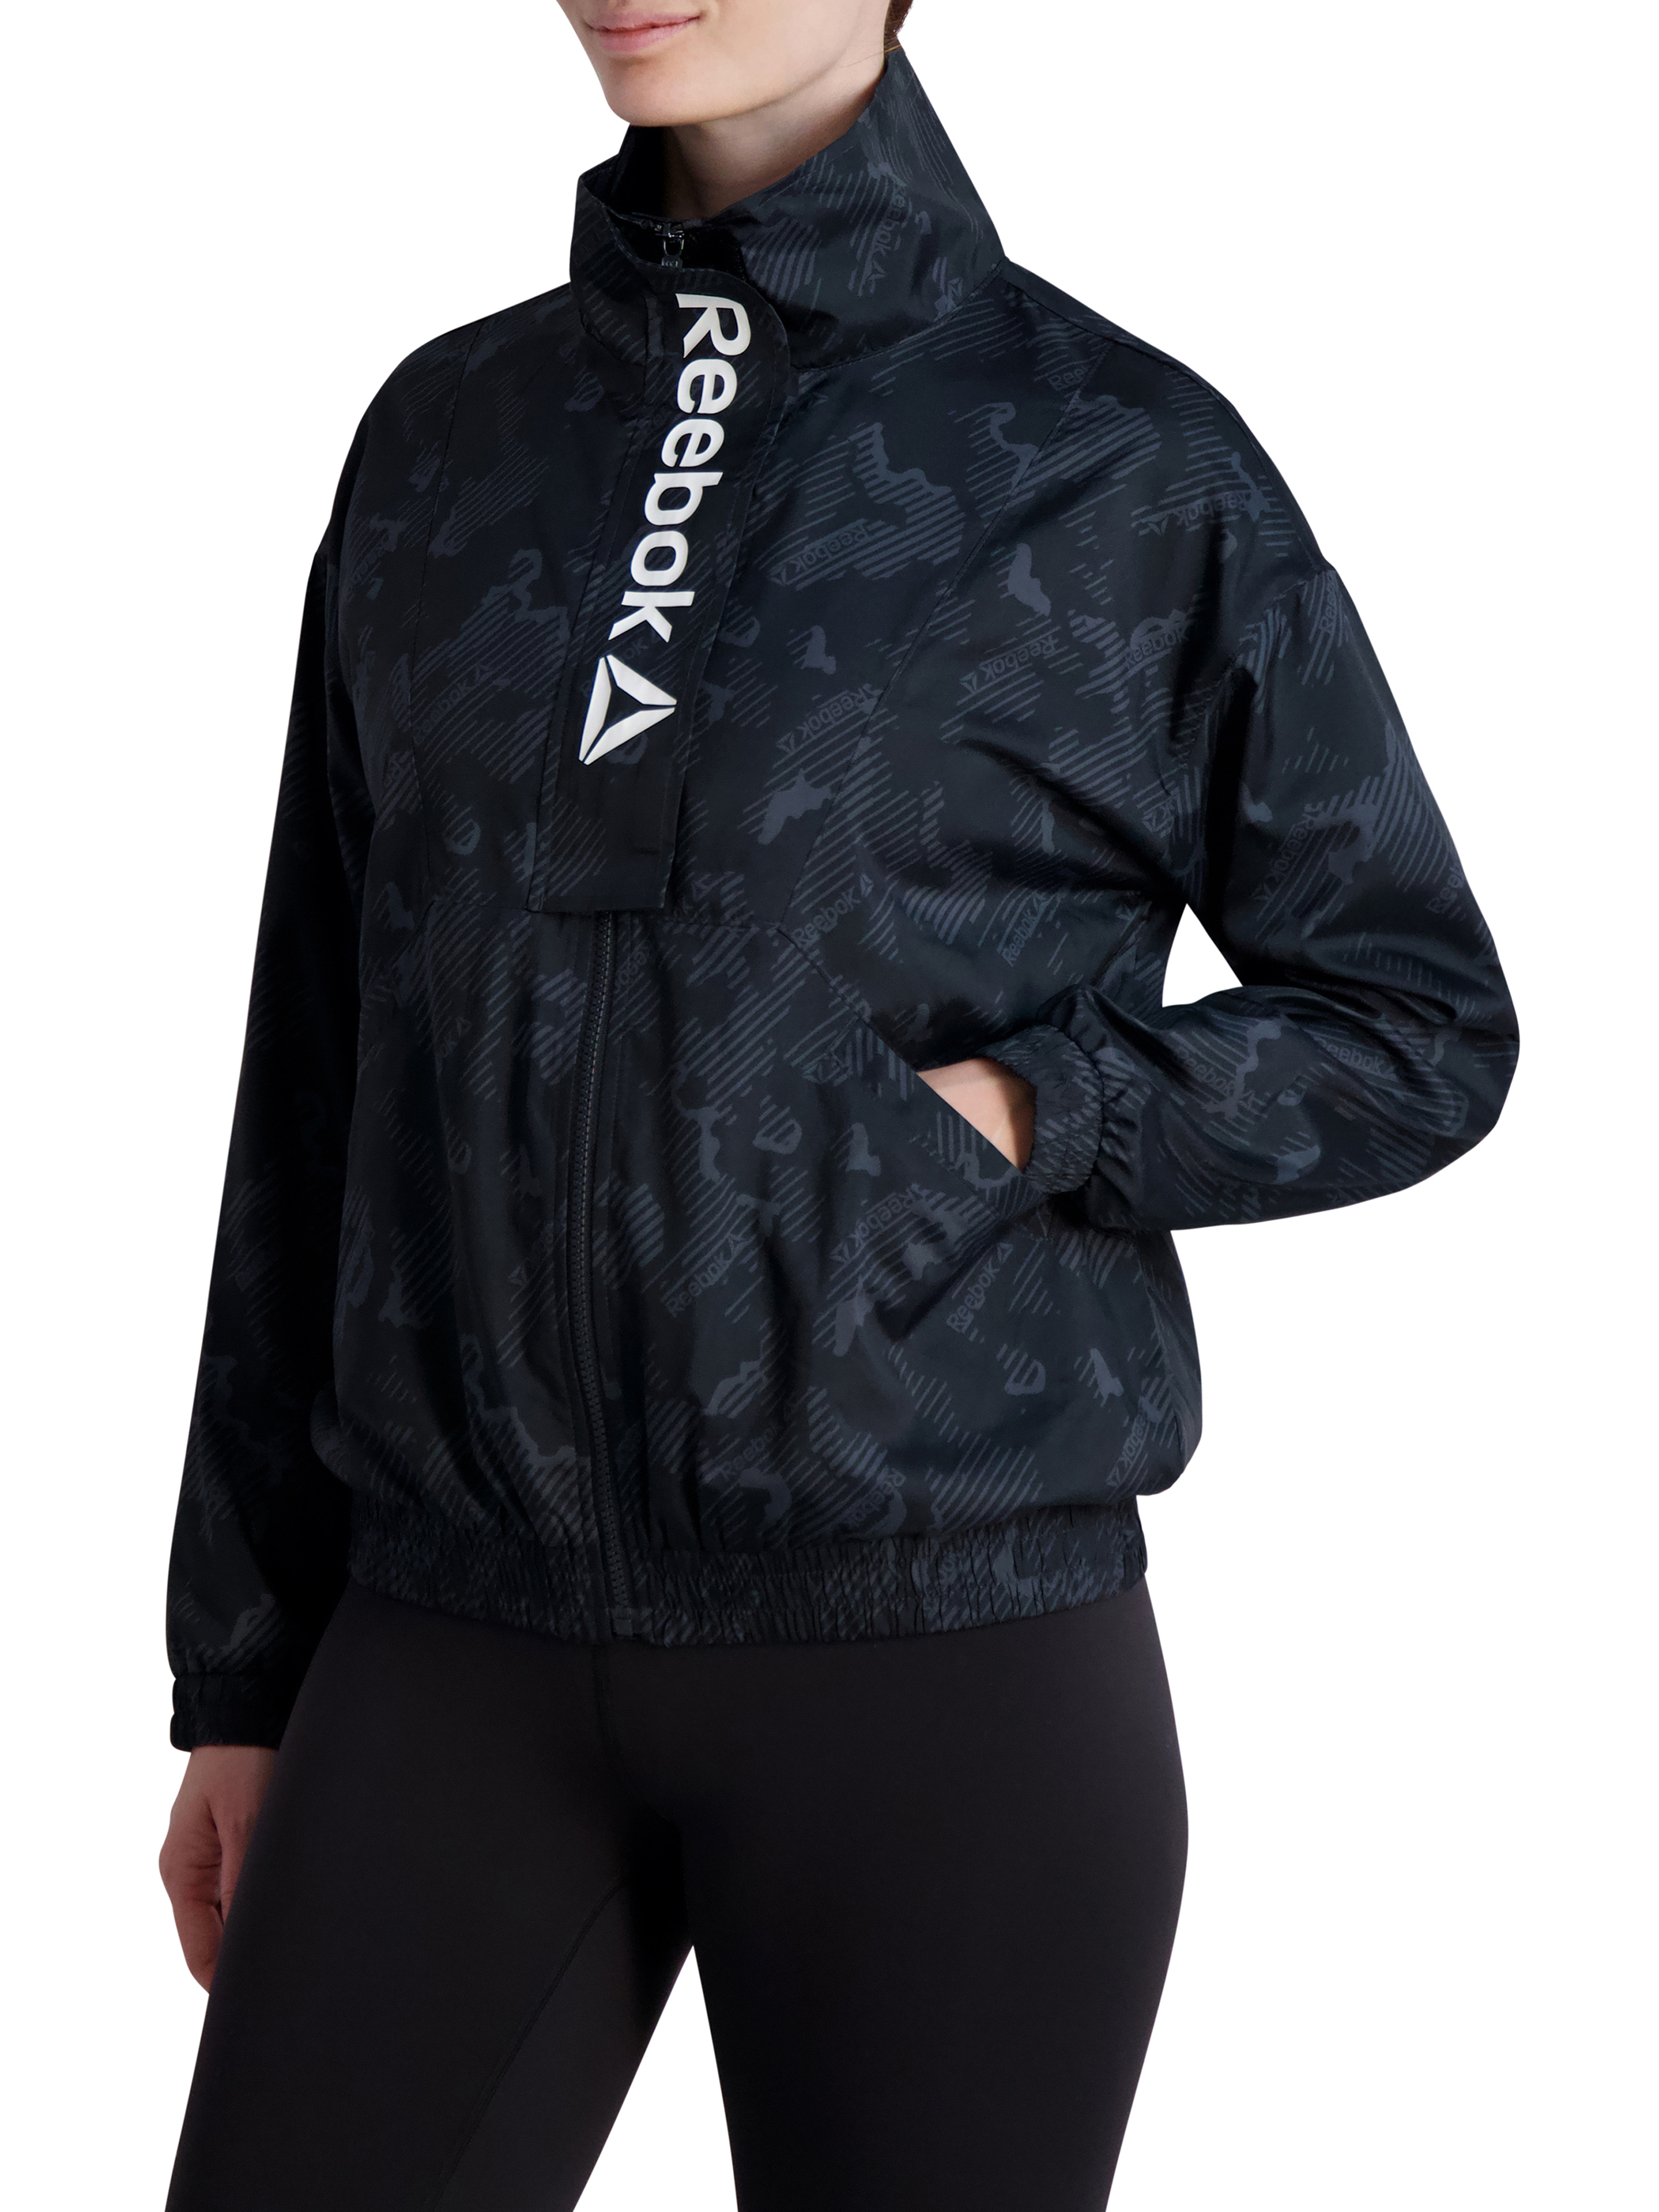 Reebok Women's Mesh Lined Printed Focus Track Jacket with Front Pockets and Front Flap - image 3 of 4